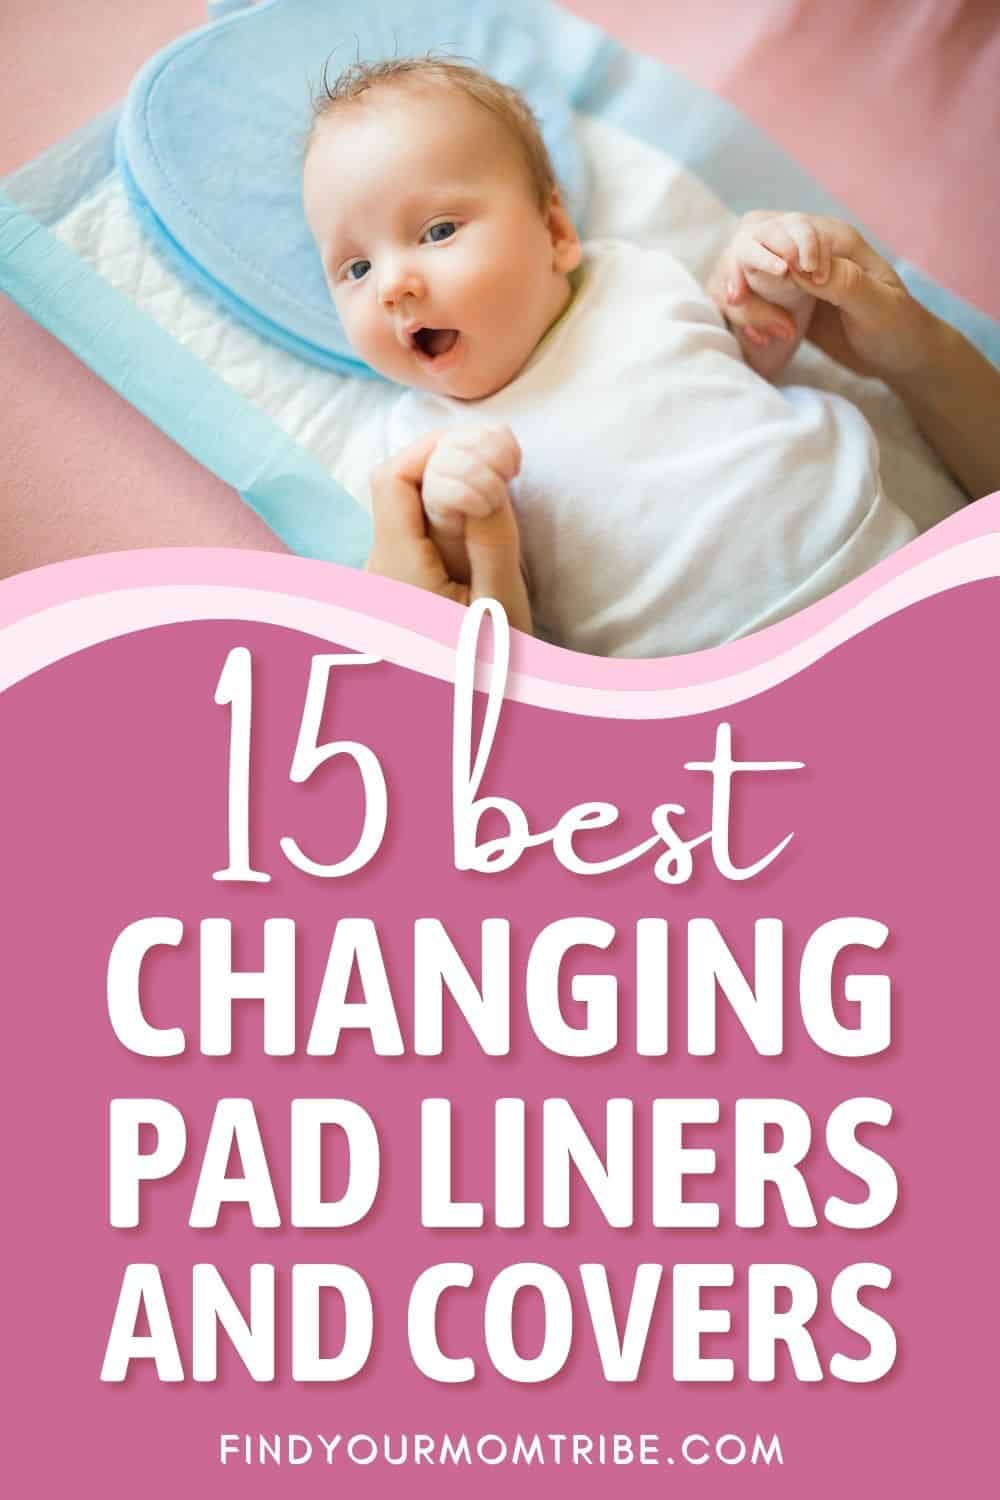 15 Best Changing Pad Liners And Covers Pinterest